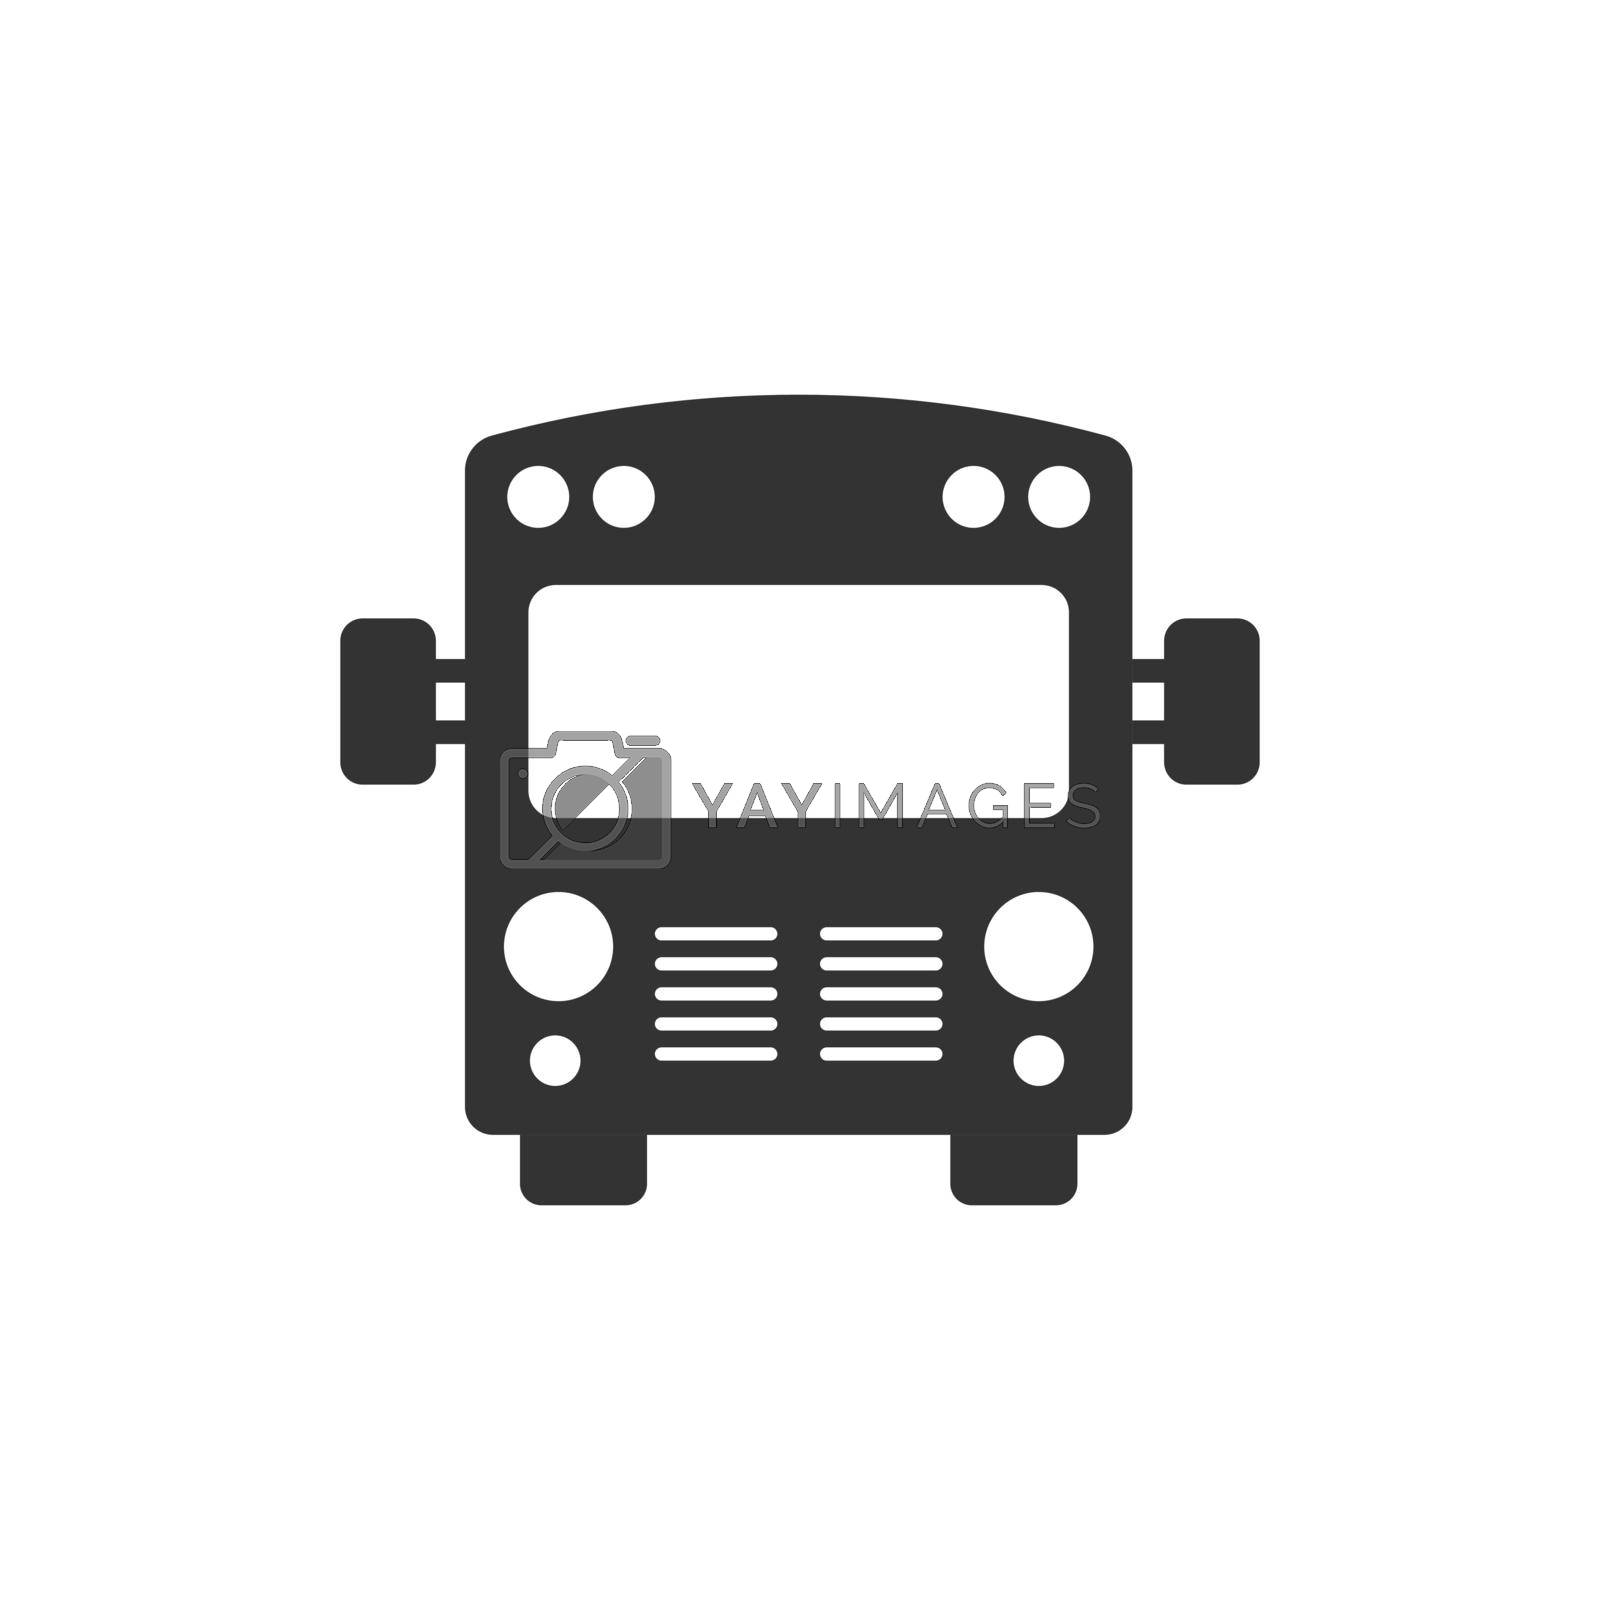 Bus icon in flat style. Coach car vector illustration on white isolated background. Autobus business concept.